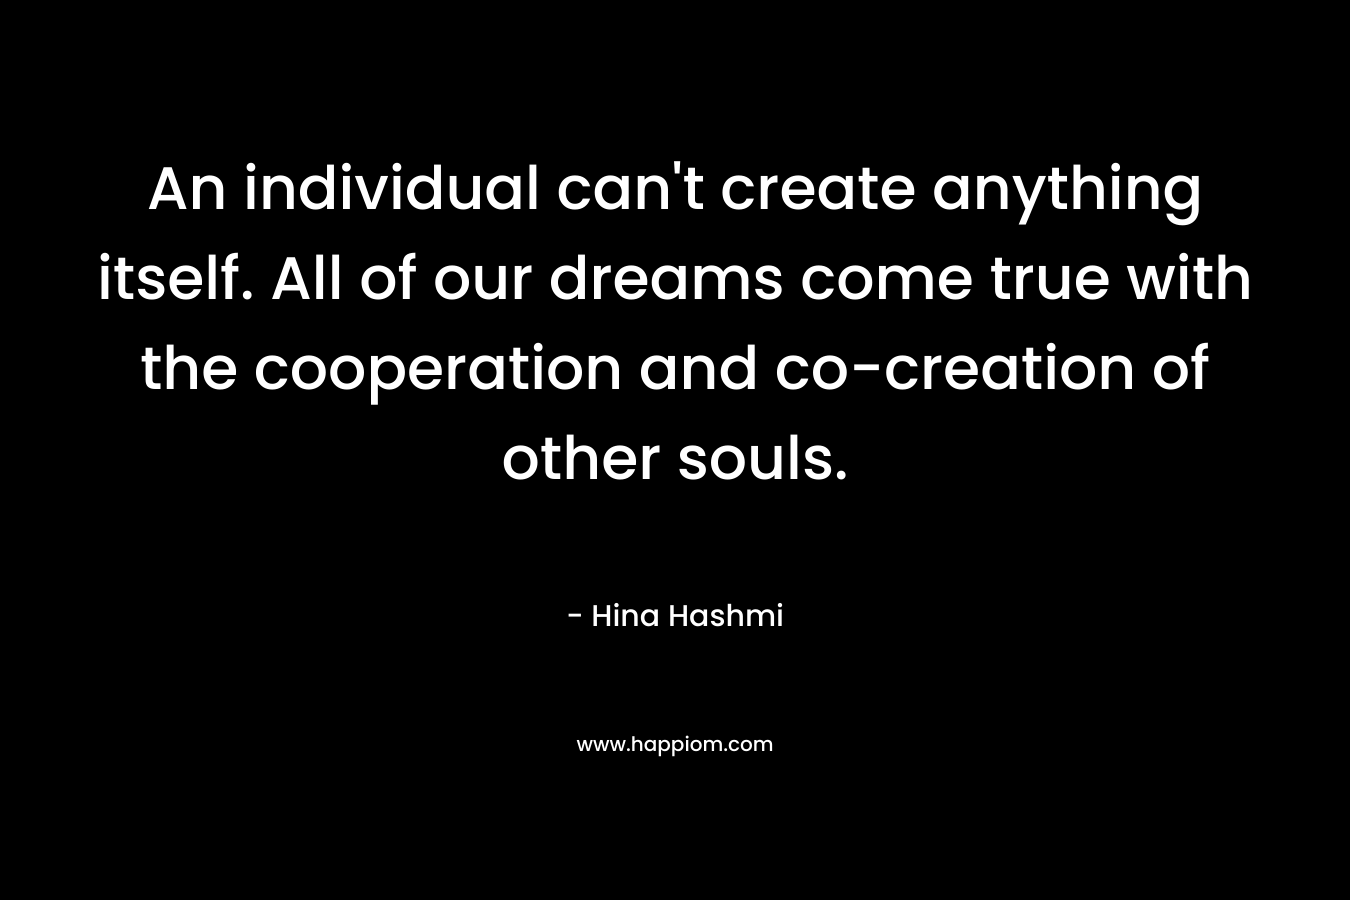 An individual can’t create anything itself. All of our dreams come true with the cooperation and co-creation of other souls. – Hina Hashmi